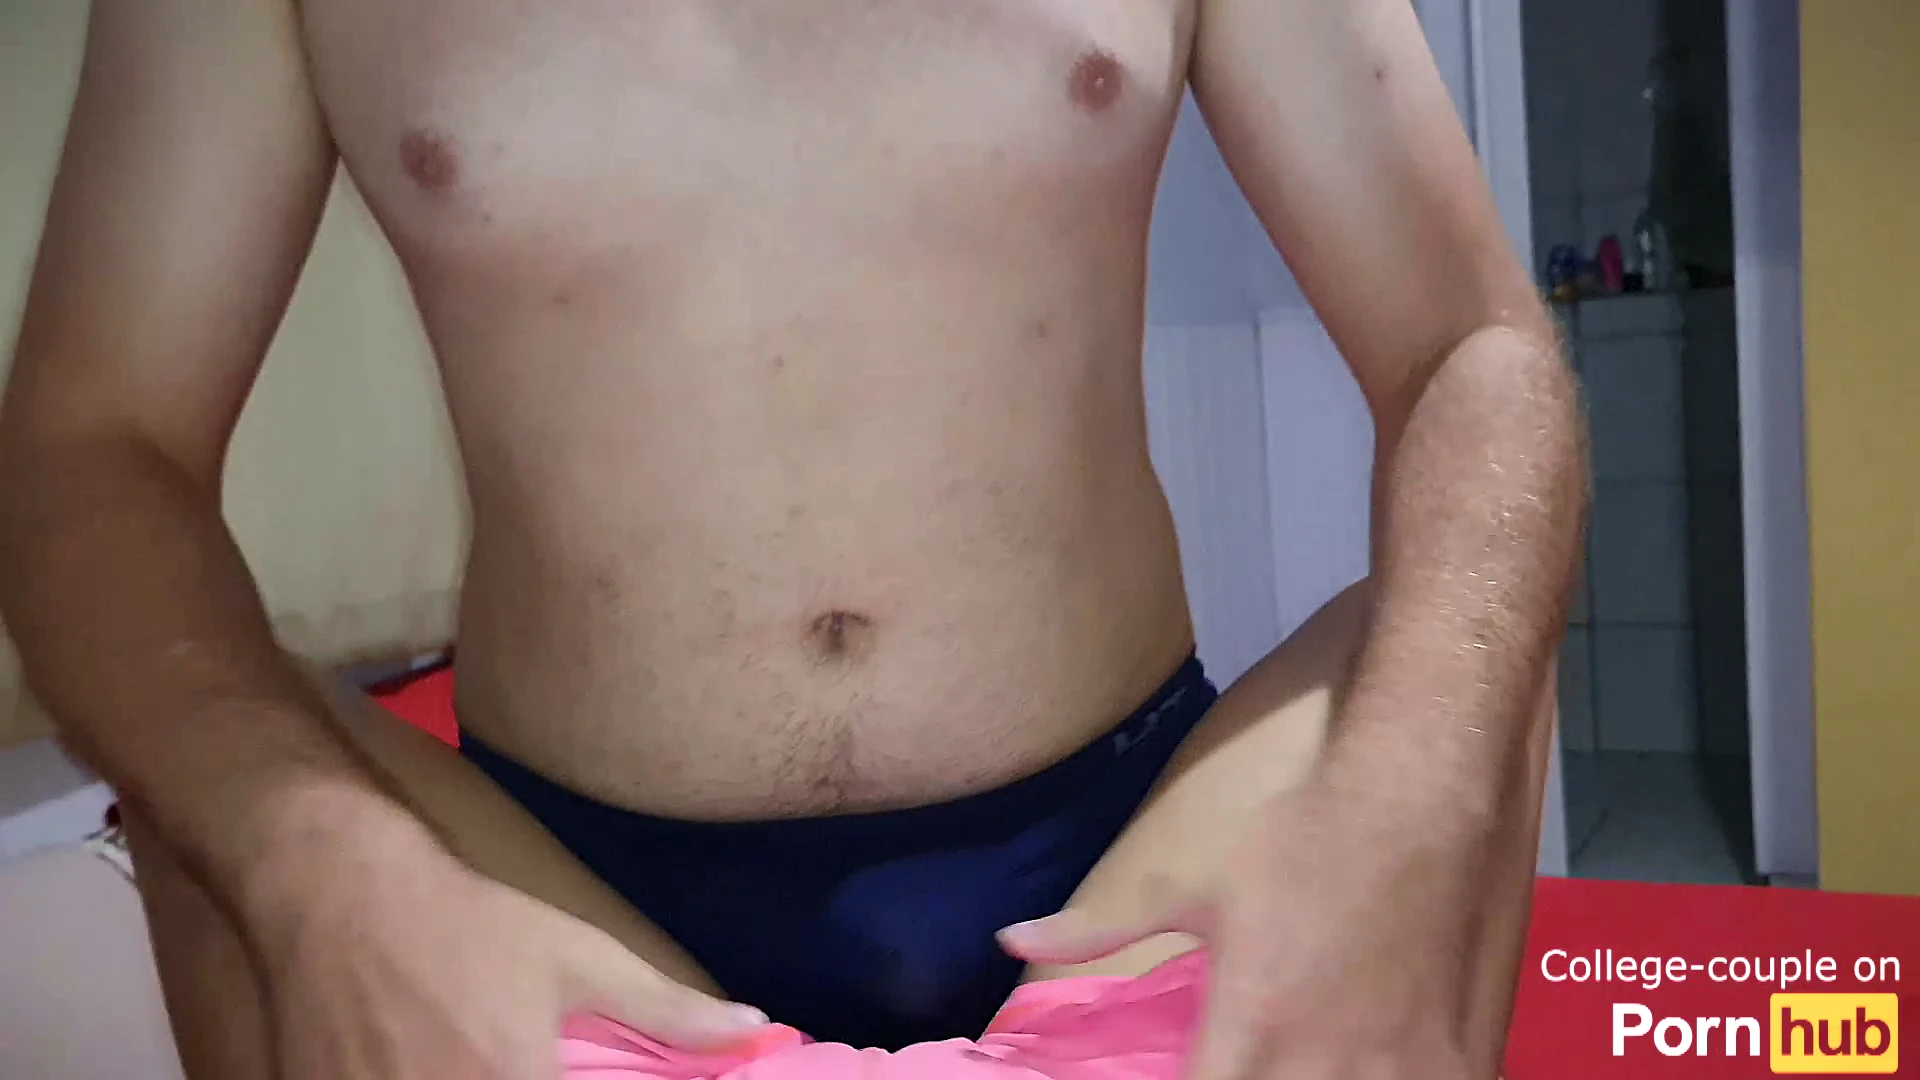 I made him cum before taking his boxers shorts xD, someone could not contain himself uuh? ... [source on comments and profile]